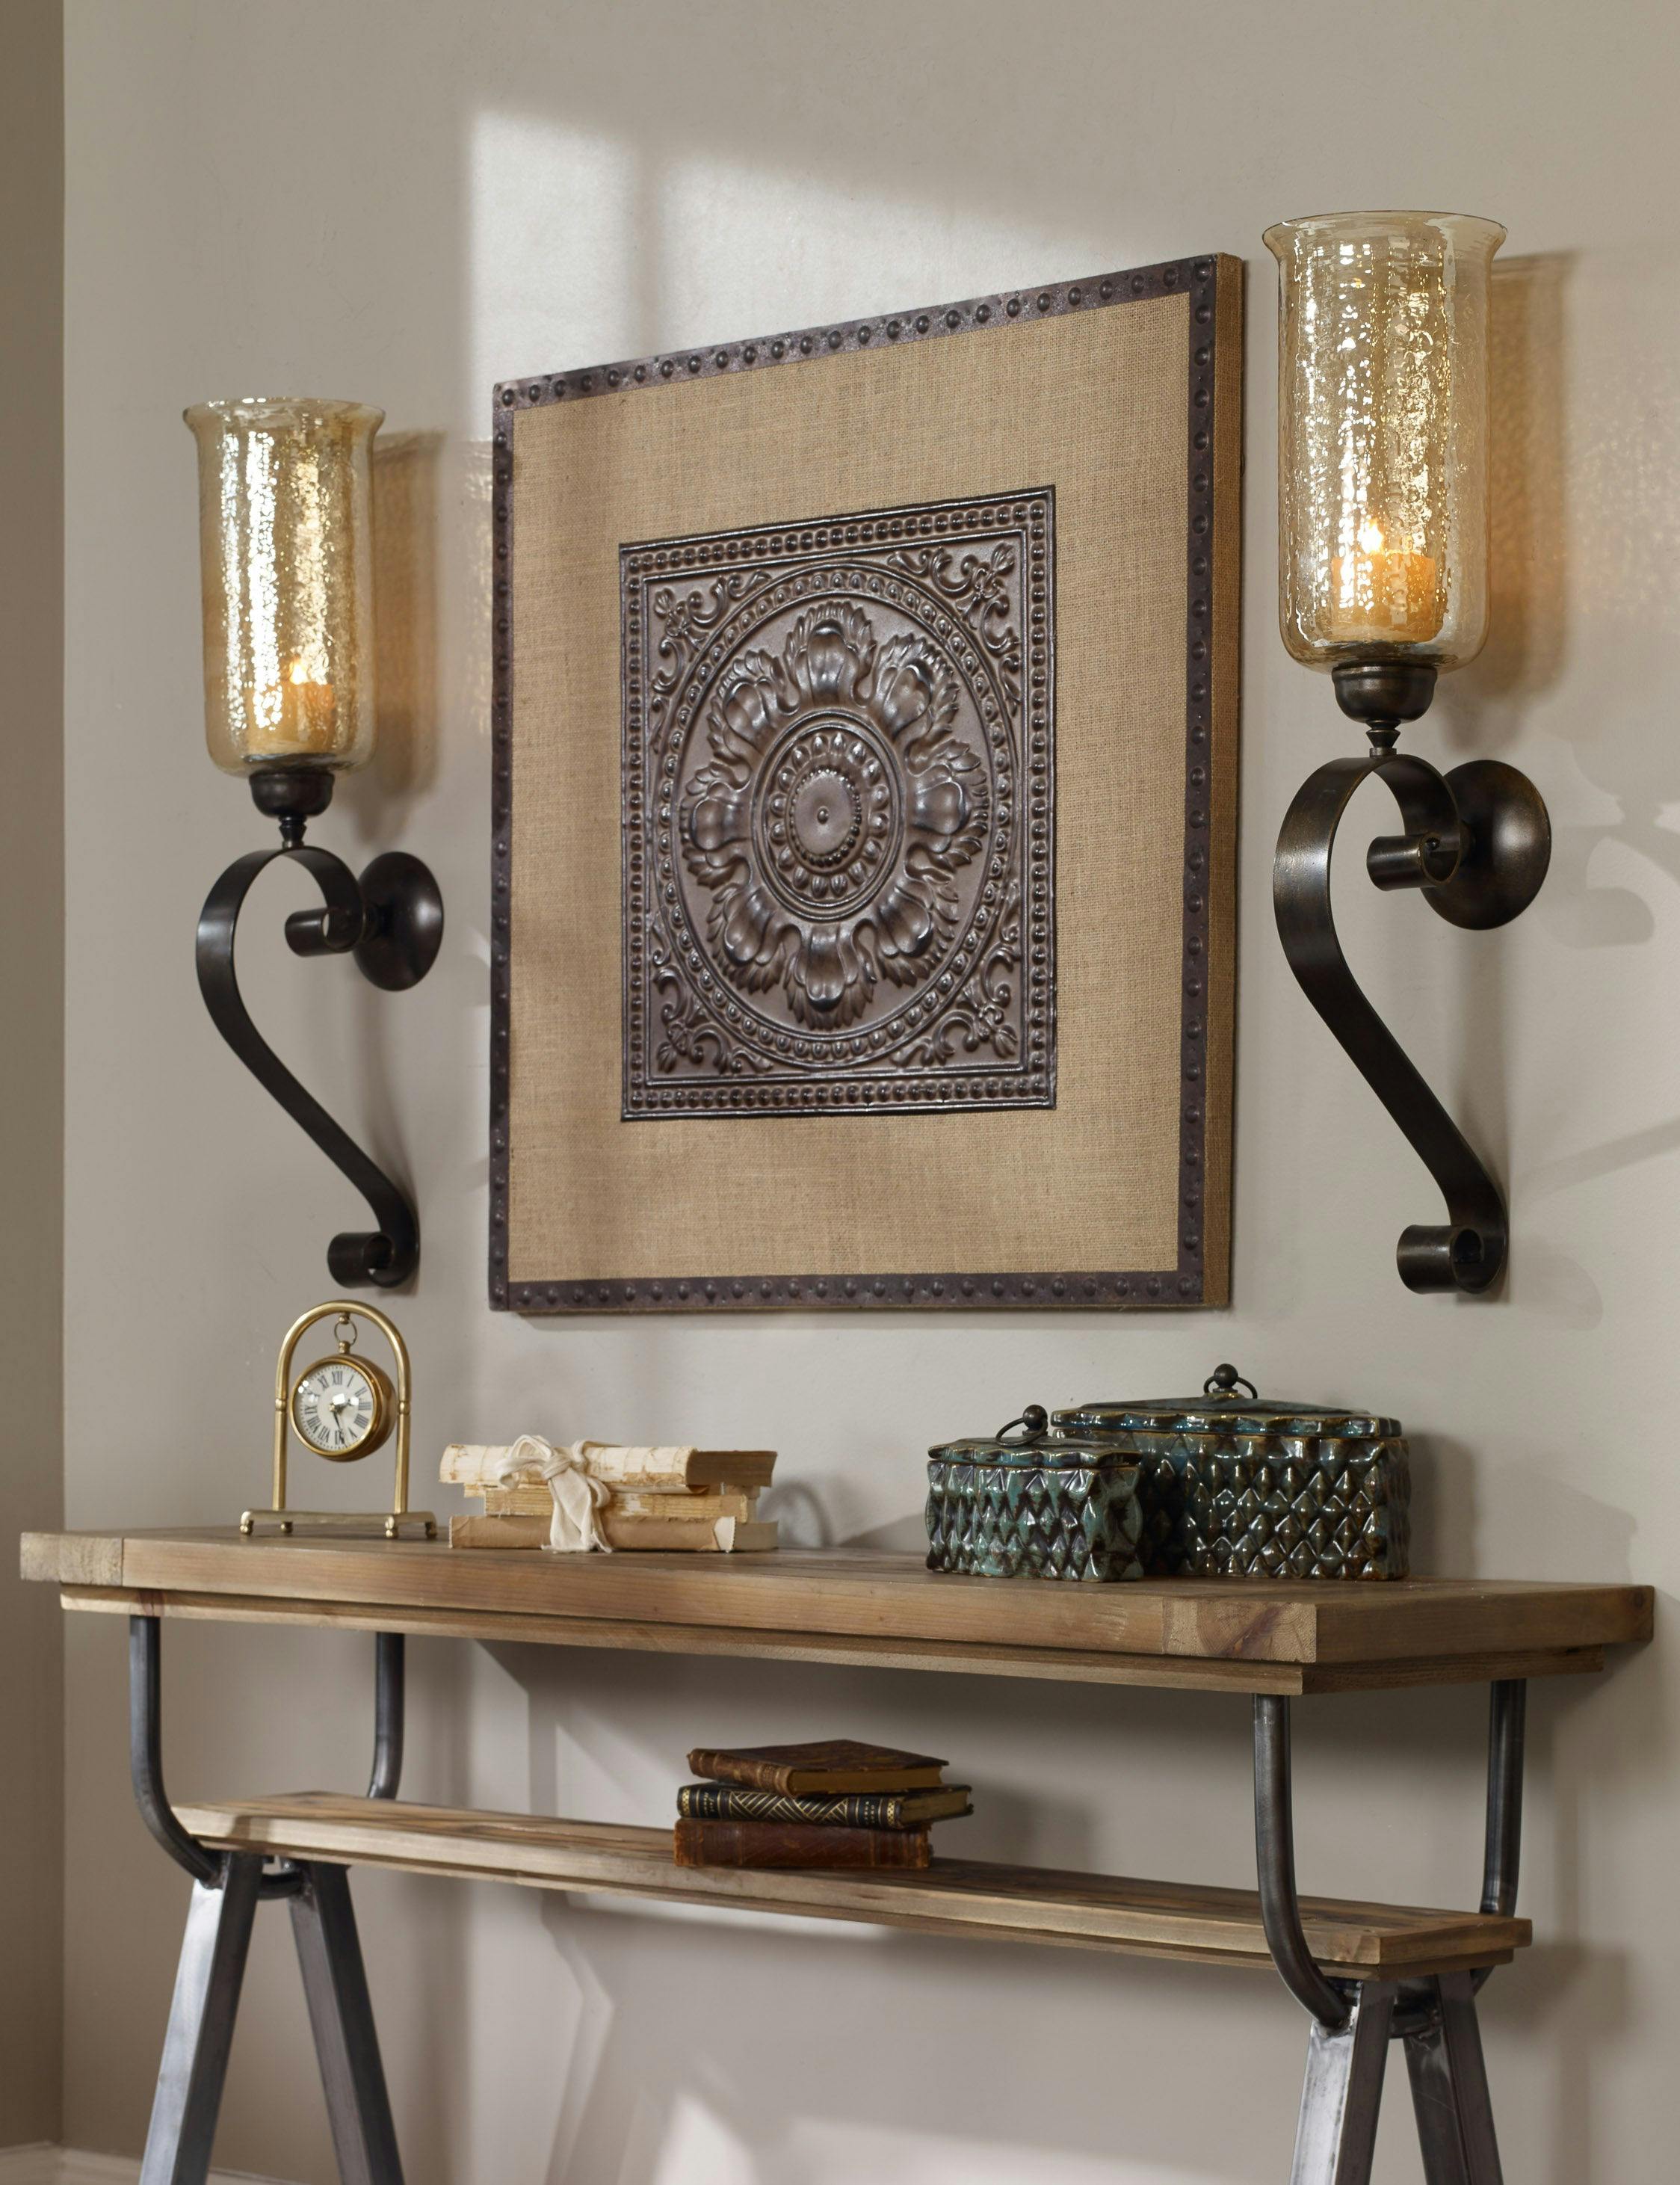 Antiqued Bronze Hand-Forged Iron and Amber Glass Candle Wall Sconce